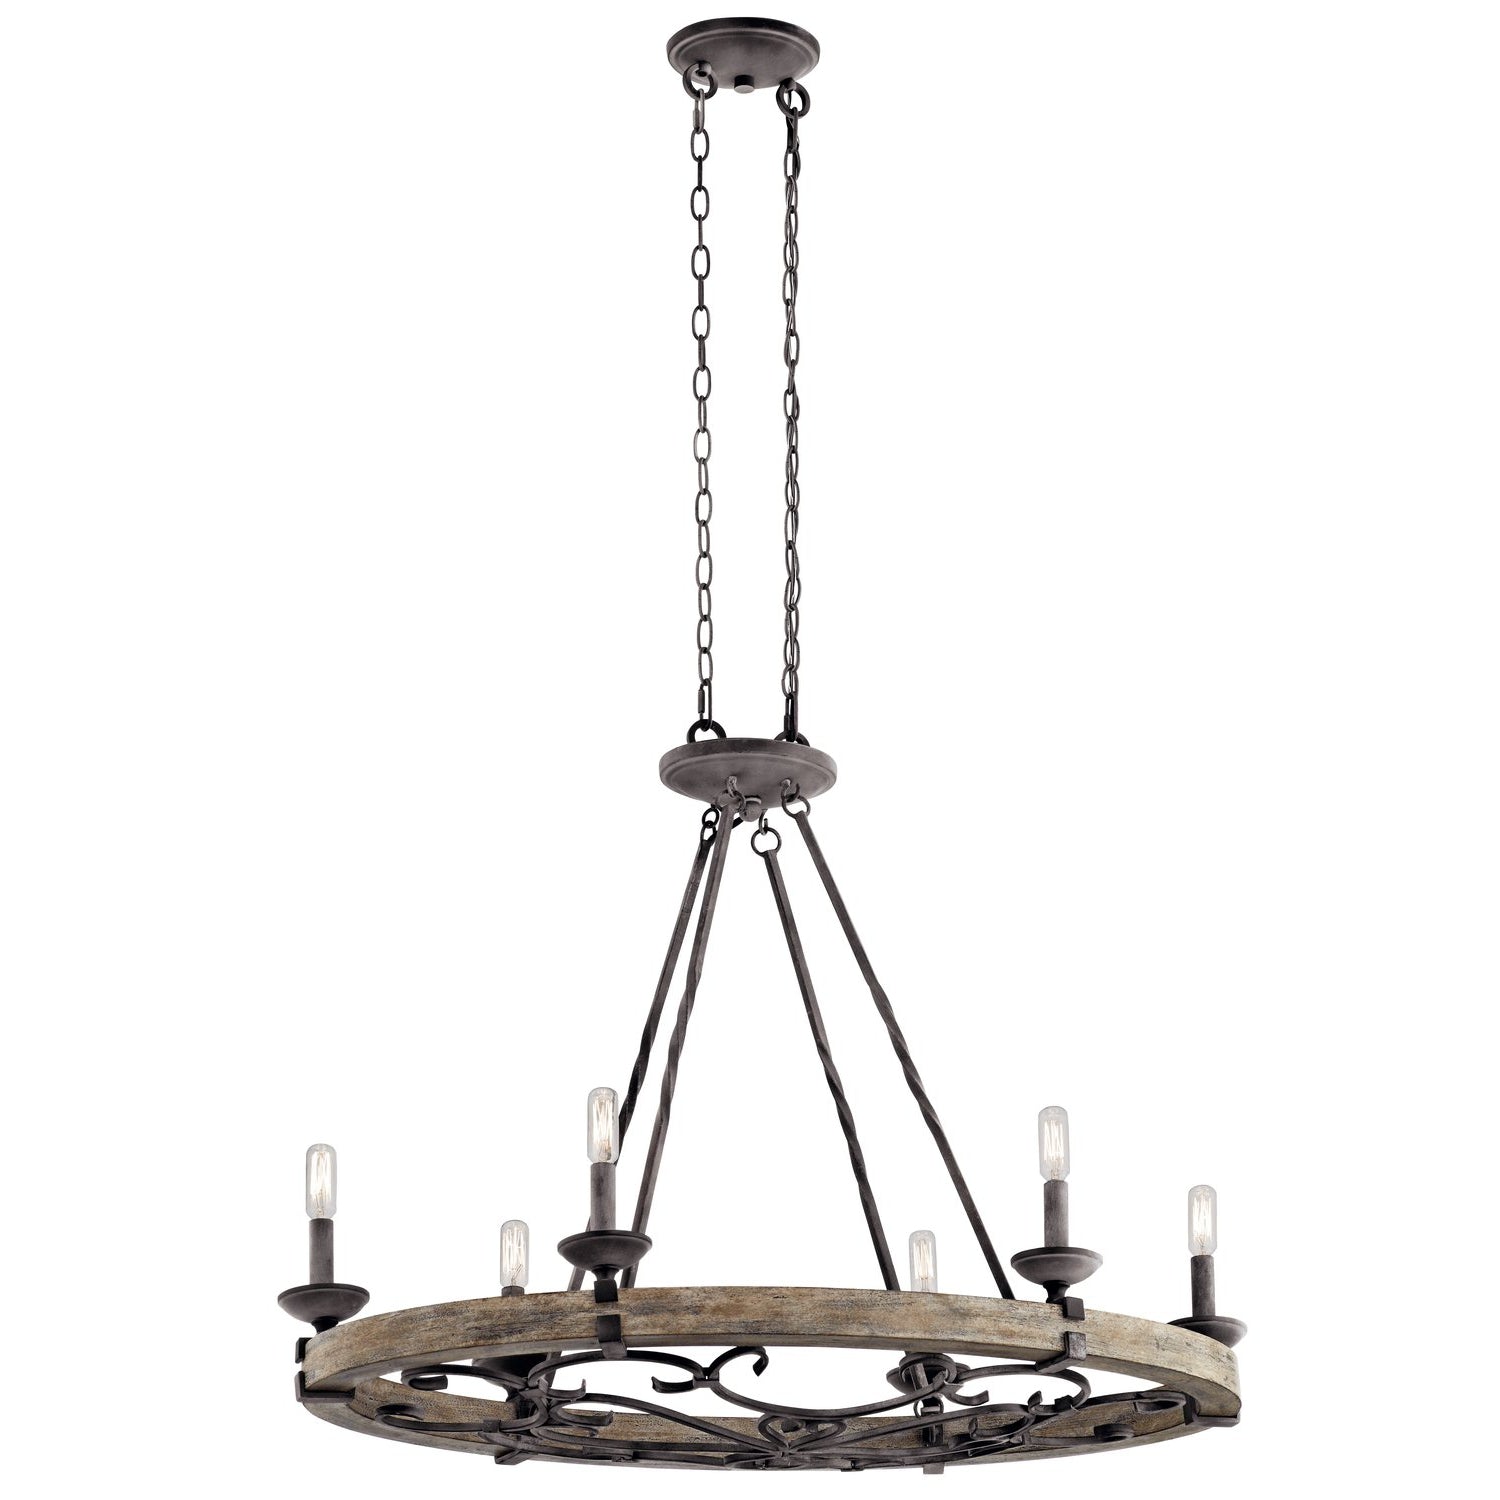 Taulbee Linear Suspension Weathered Zinc